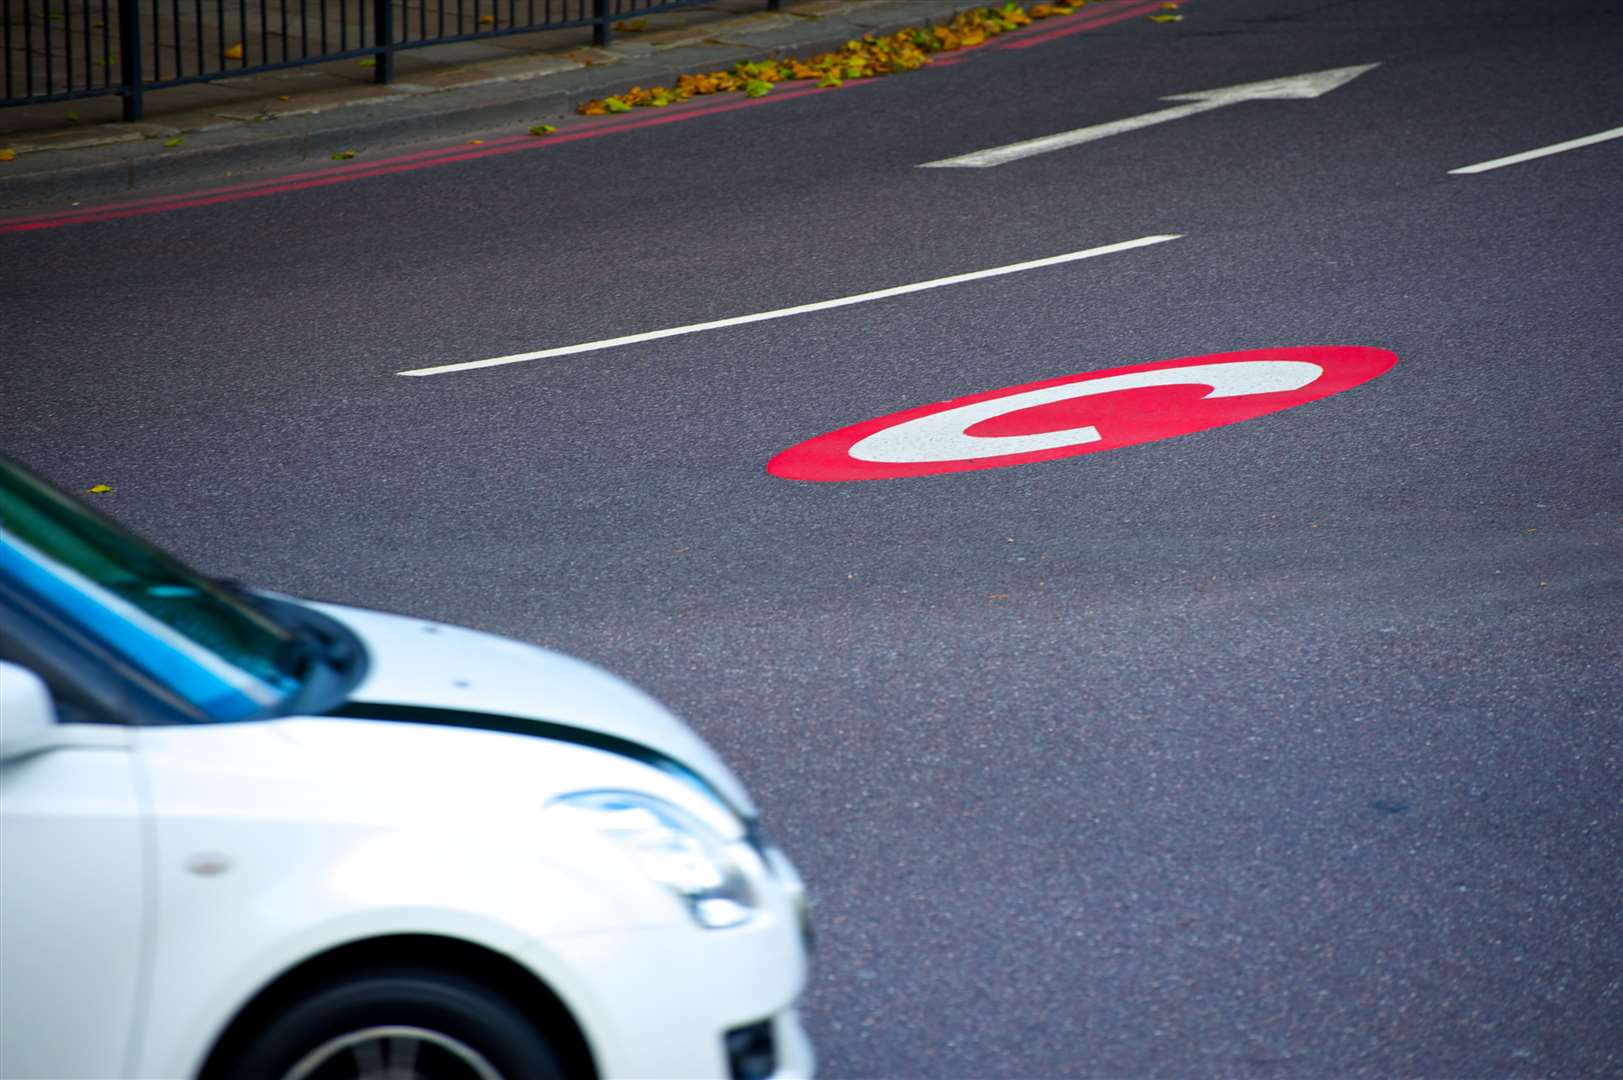 London's congestion charge will no longer apply at night